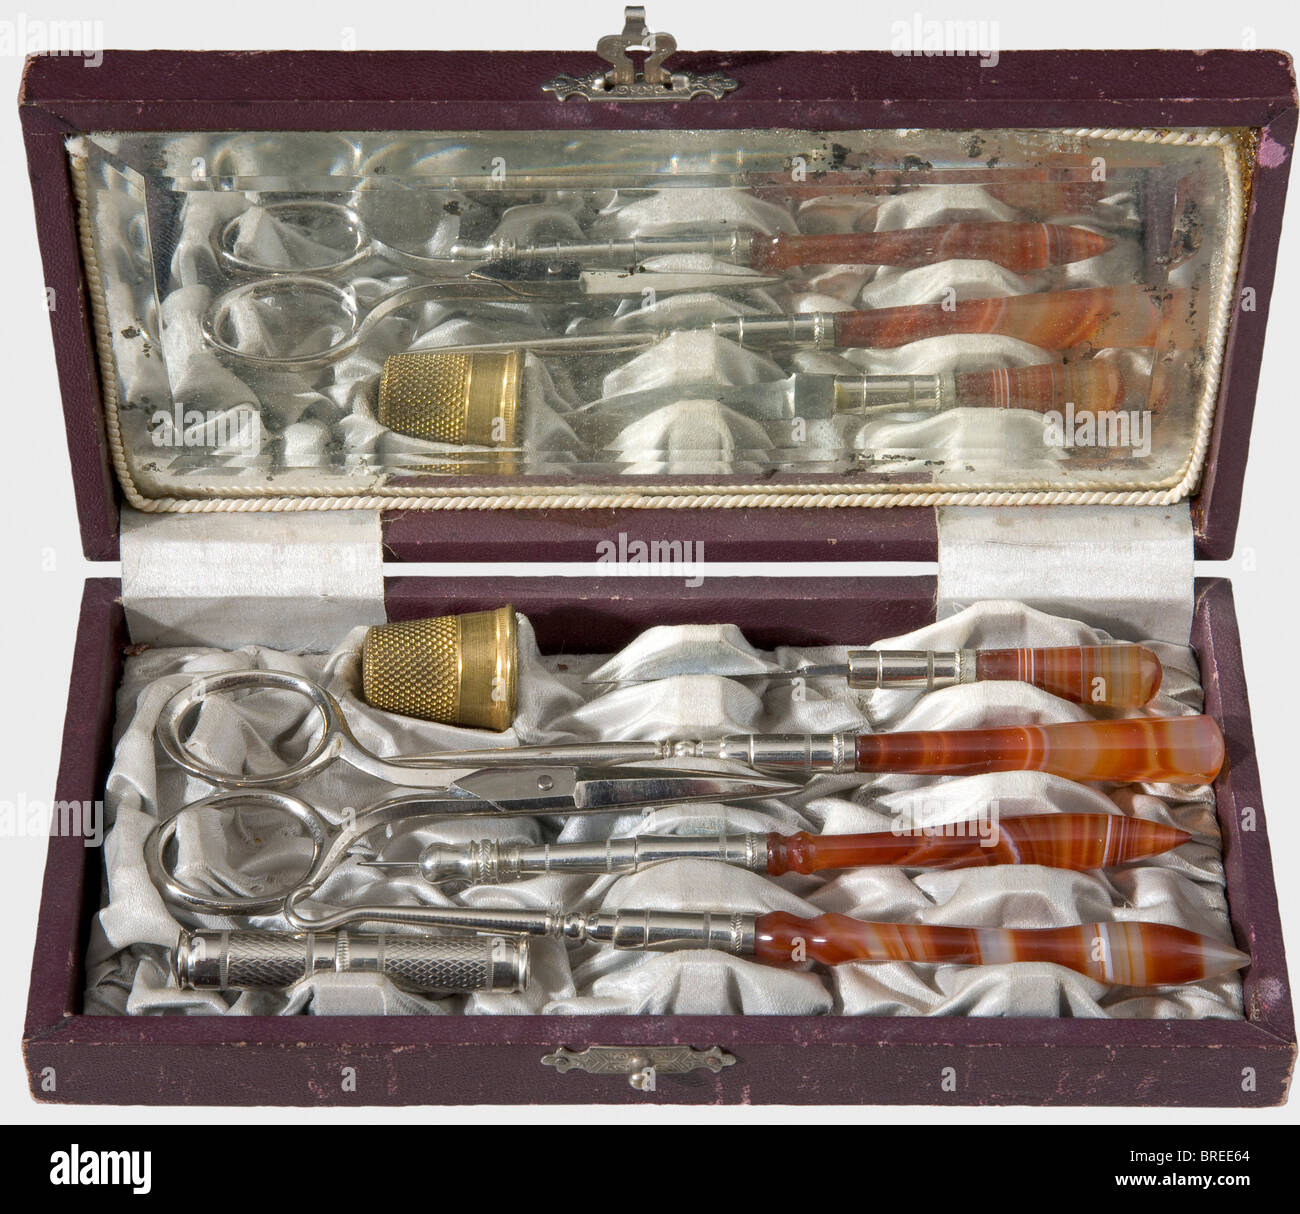 A traveller's sewing kit with agate handles., circa 1900 Seven pieces, four beautifully figured agate handles. In an artificial leather case with light blue silk lining, and a mirror (somewhat stained) in the lid. Inventory label, 'H.V.v.W. G.v.R. Privat-Eigentum' on the bottom. Dimensions ca. 16.5 x 8.5 x 2.8 cm. Provenance: Grand Duchess Vera Konstantinovna Romanova (1854 - 1912). historic, historical, 1900s, 20th century, 19th century, object, objects, stills, clipping, clippings, cut out, cut-out, cut-outs, fine arts, art, artful, Stock Photo